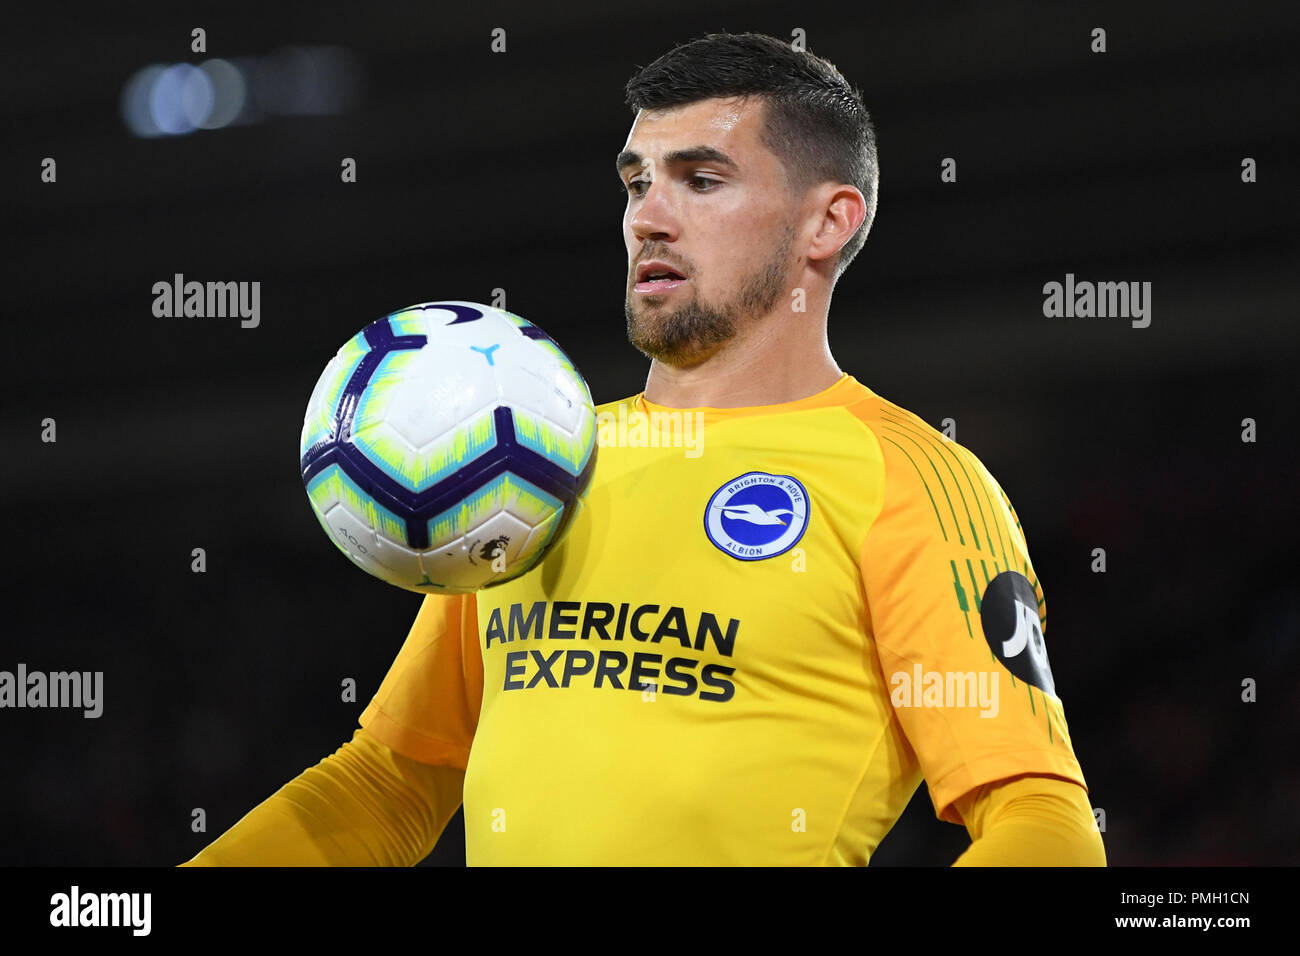 Matthew Ryan of Brighton & Hove Albion - Southampton v Brighton & Hove Albion, Premier League, St Mary's Stadium, Southampton - 17th September 2018  STRICTLY EDITORIAL USE ONLY - DataCo rules apply - The use of this image in a commercial context is strictly prohibited unless express permission has been given by the club(s) concerned. Examples of commercial usage include, but are not limited to, use in betting and gaming, marketing and advertising products. No use with unauthorised audio, video, data, fixture lists, club and or league logos or services including those listed as 'live' Stock Photo